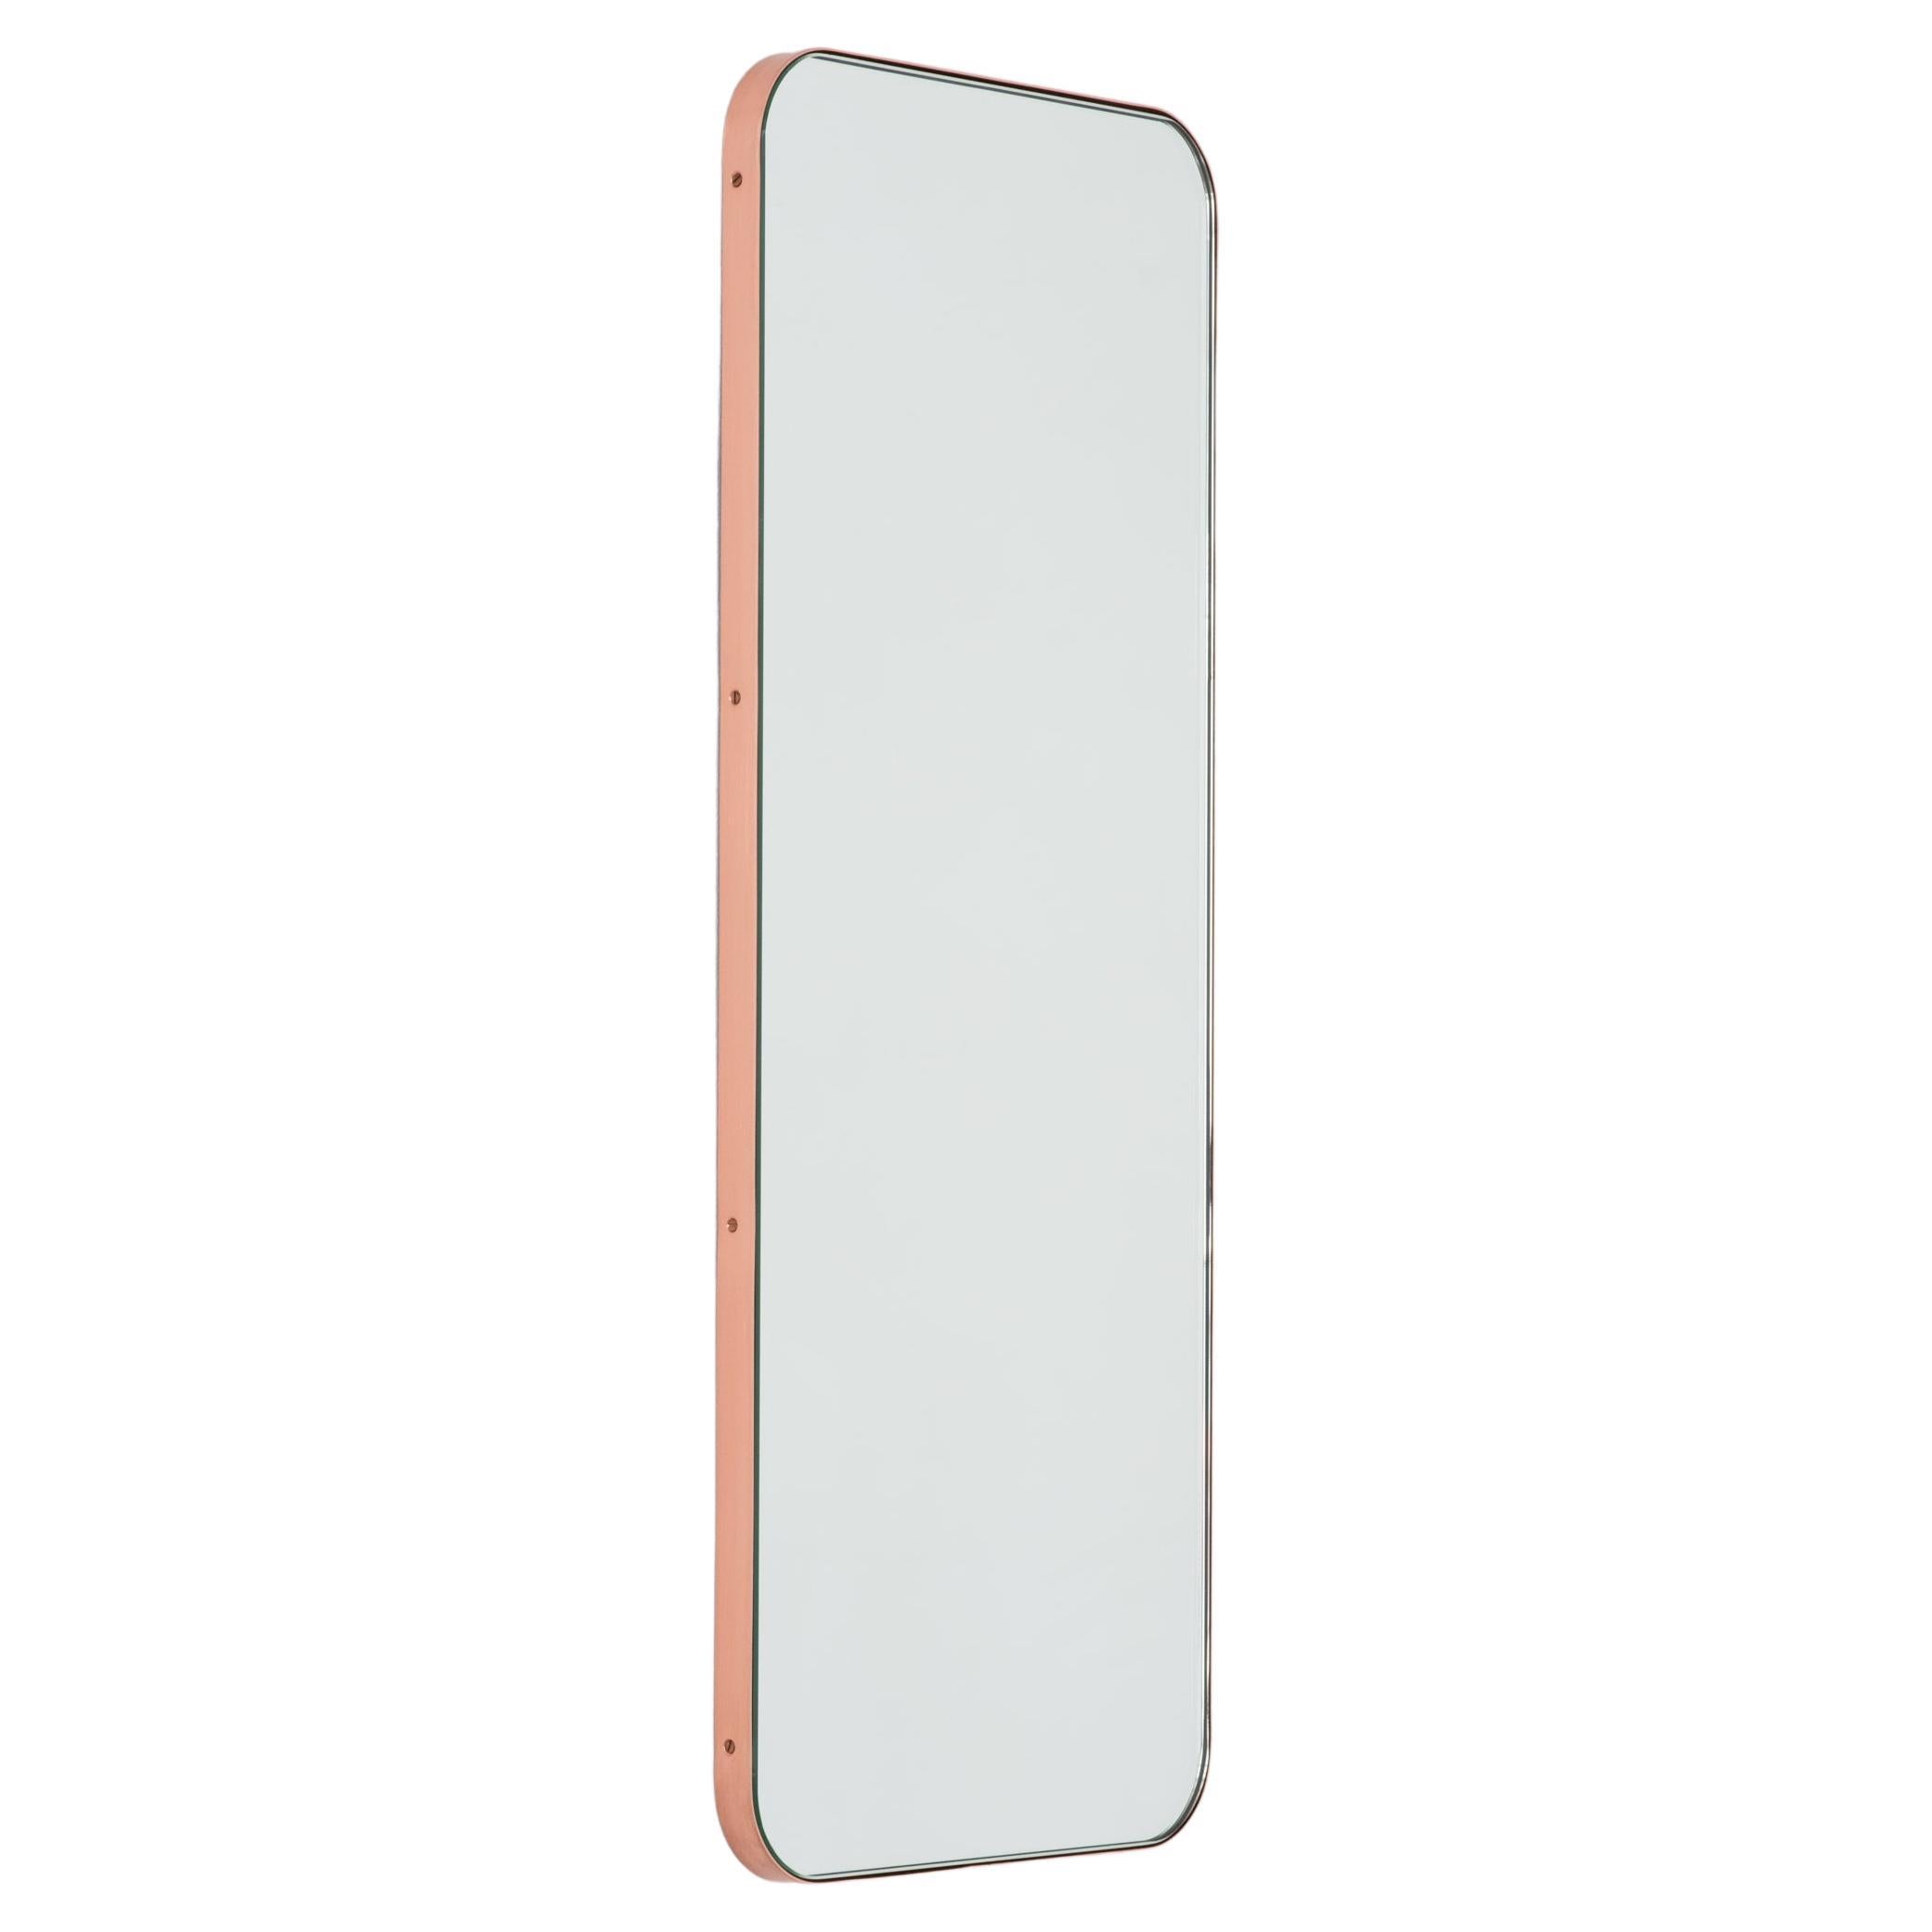 Quadris Rectangular Contemporary Mirror with a Copper Frame, Large For Sale